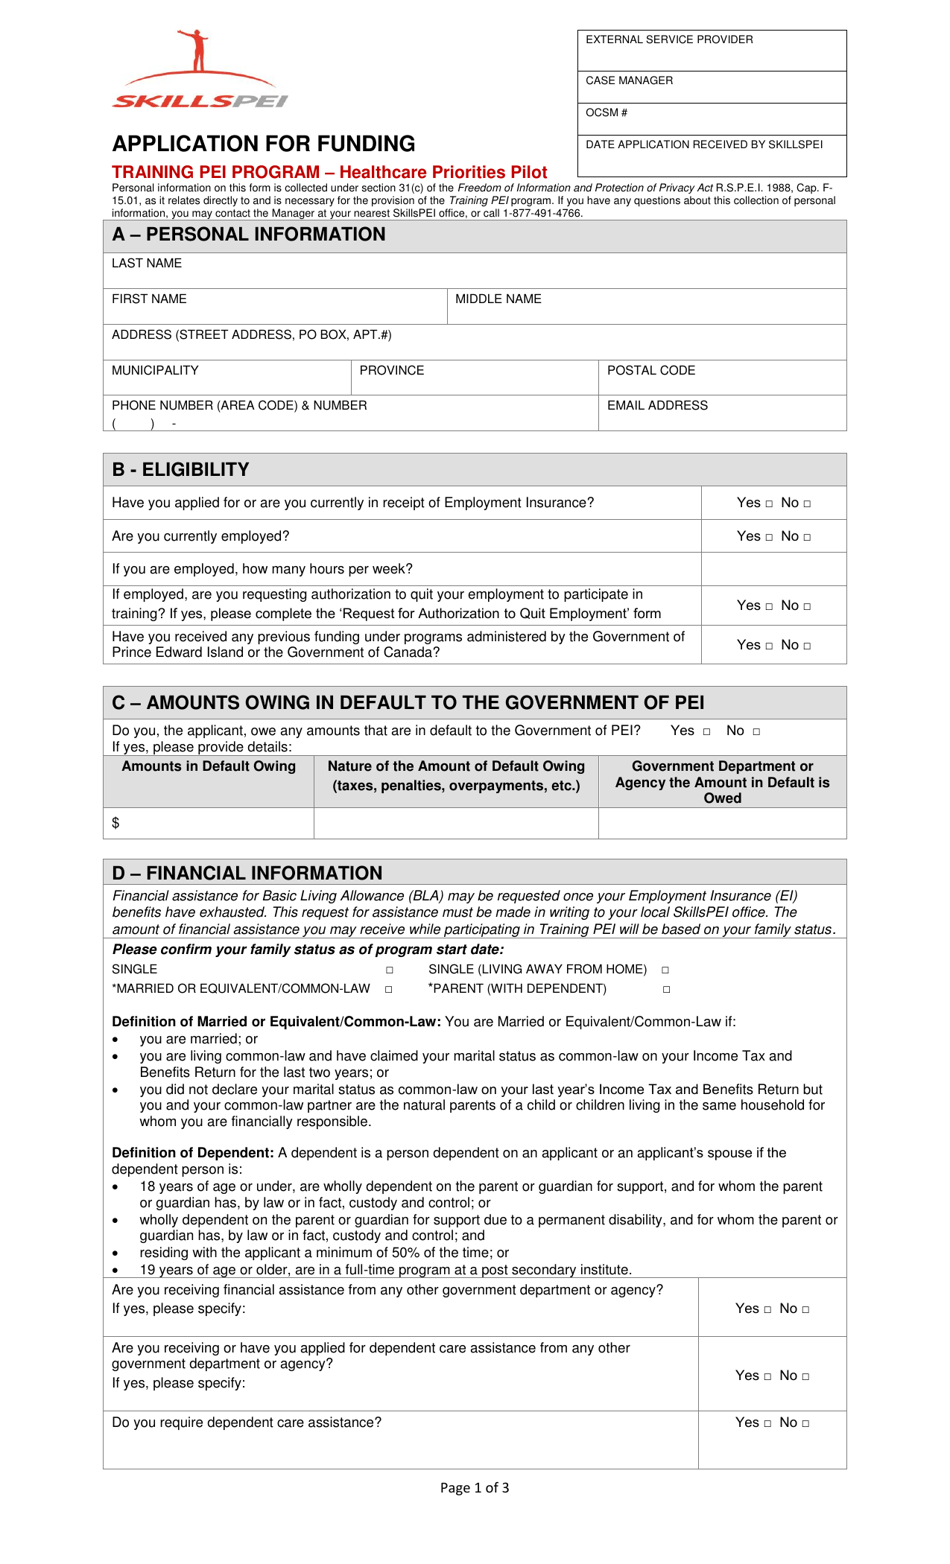 Application for Funding - Training Pei Program - Healthcare Priorities Pilot - Prince Edward Island, Canada, Page 1